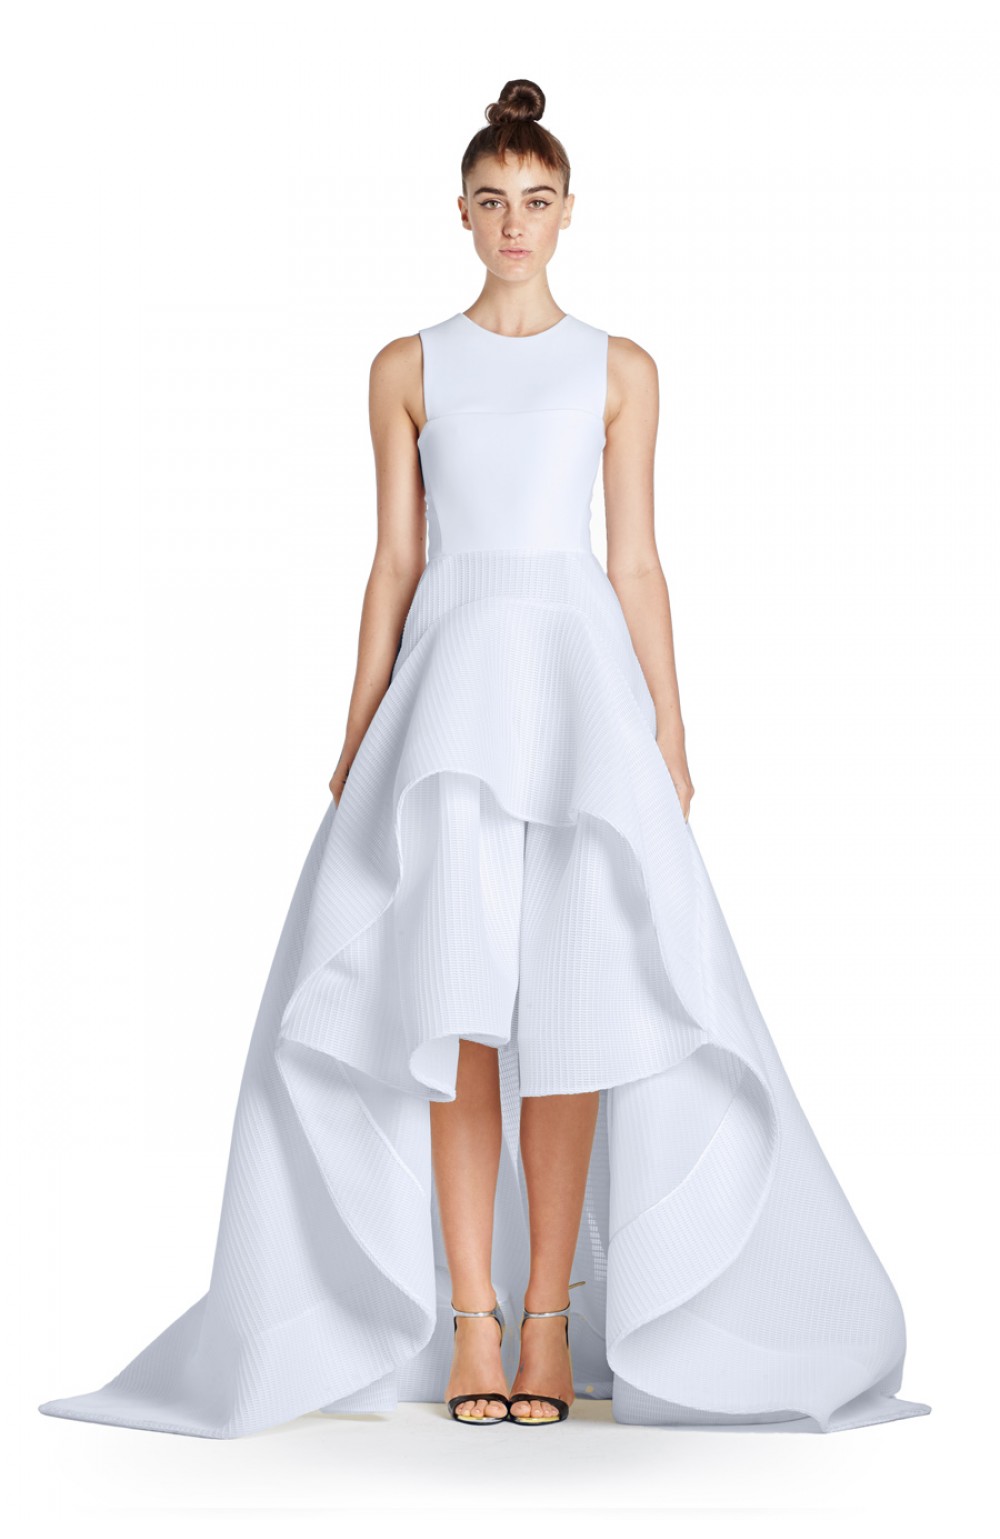 present_gown_white_27_0253_1_grey